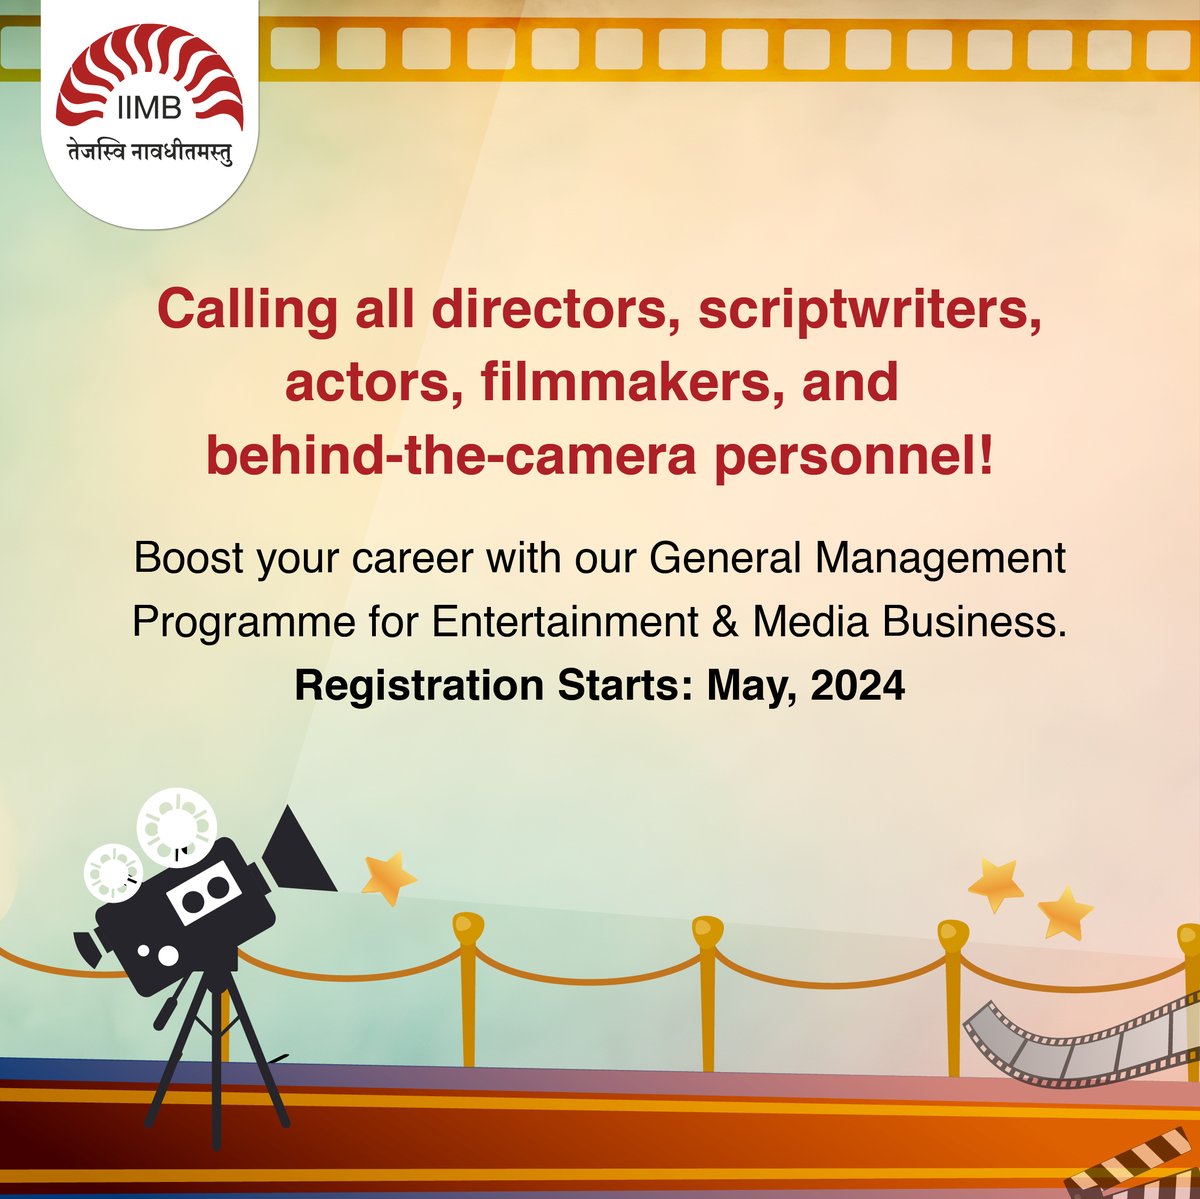 Calling all directors, scriptwriters, actors, filmmakers, and behind-the-scenes talents! Our General Management Programme for #Entertainment & Media Business awaits you. Registration opens in May 2024. Let's elevate your career together!

#IIMB #IIMBangalore #GEM #MediaBusiness